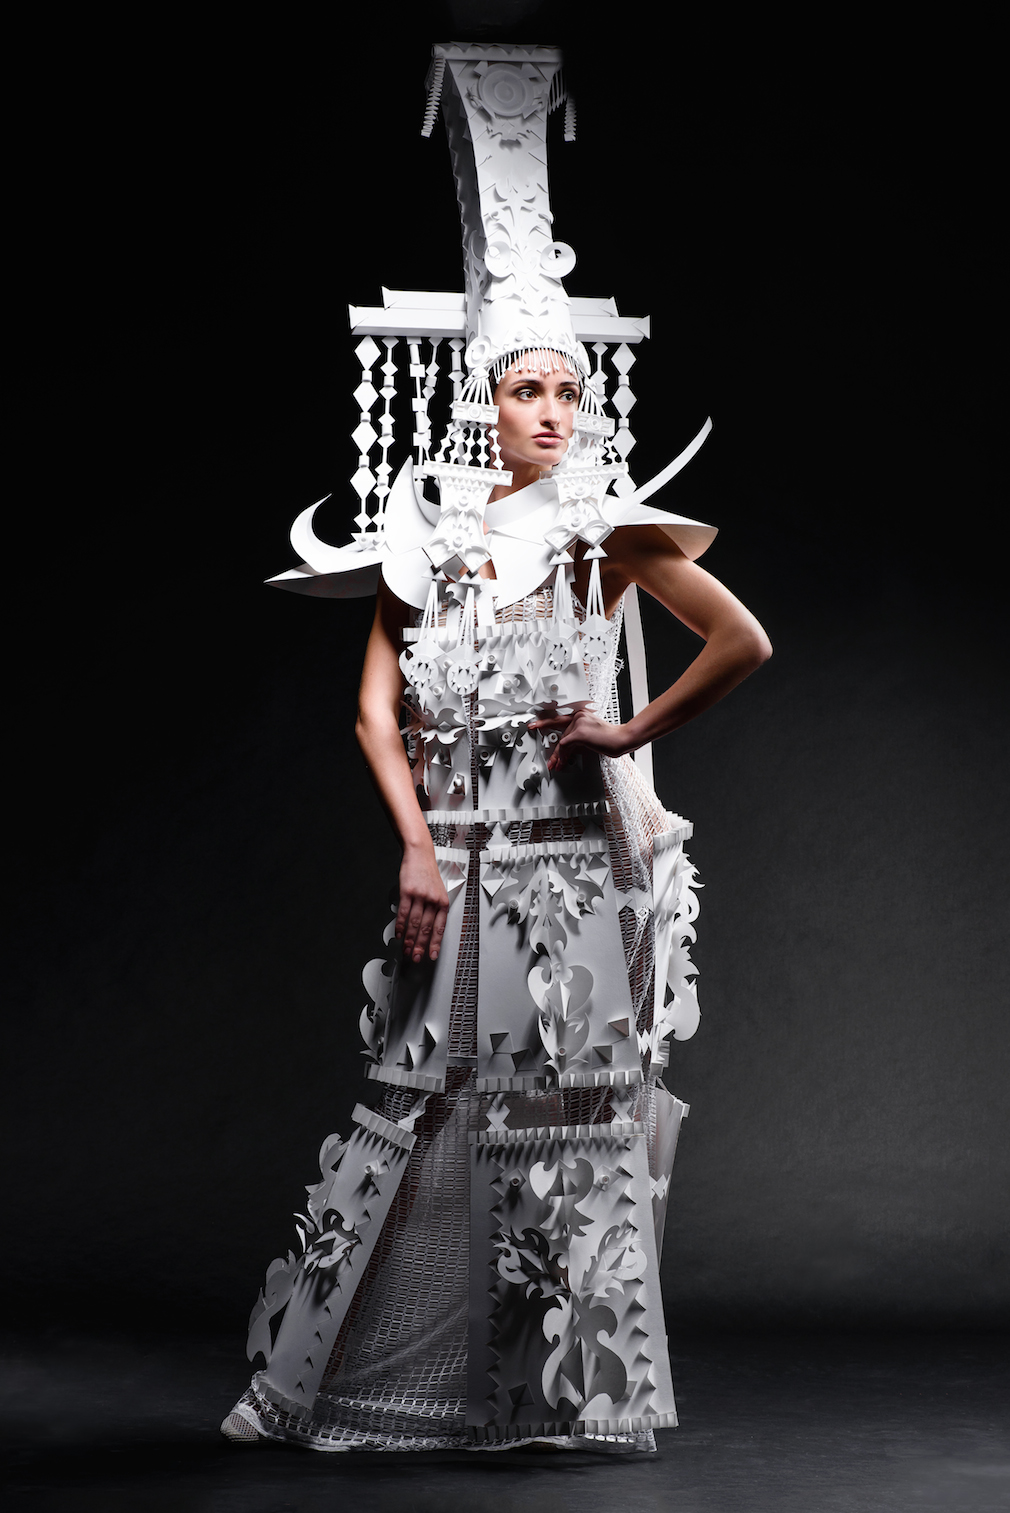 These Mongolian Wedding Costumes Are Made Entirely of Paper ...